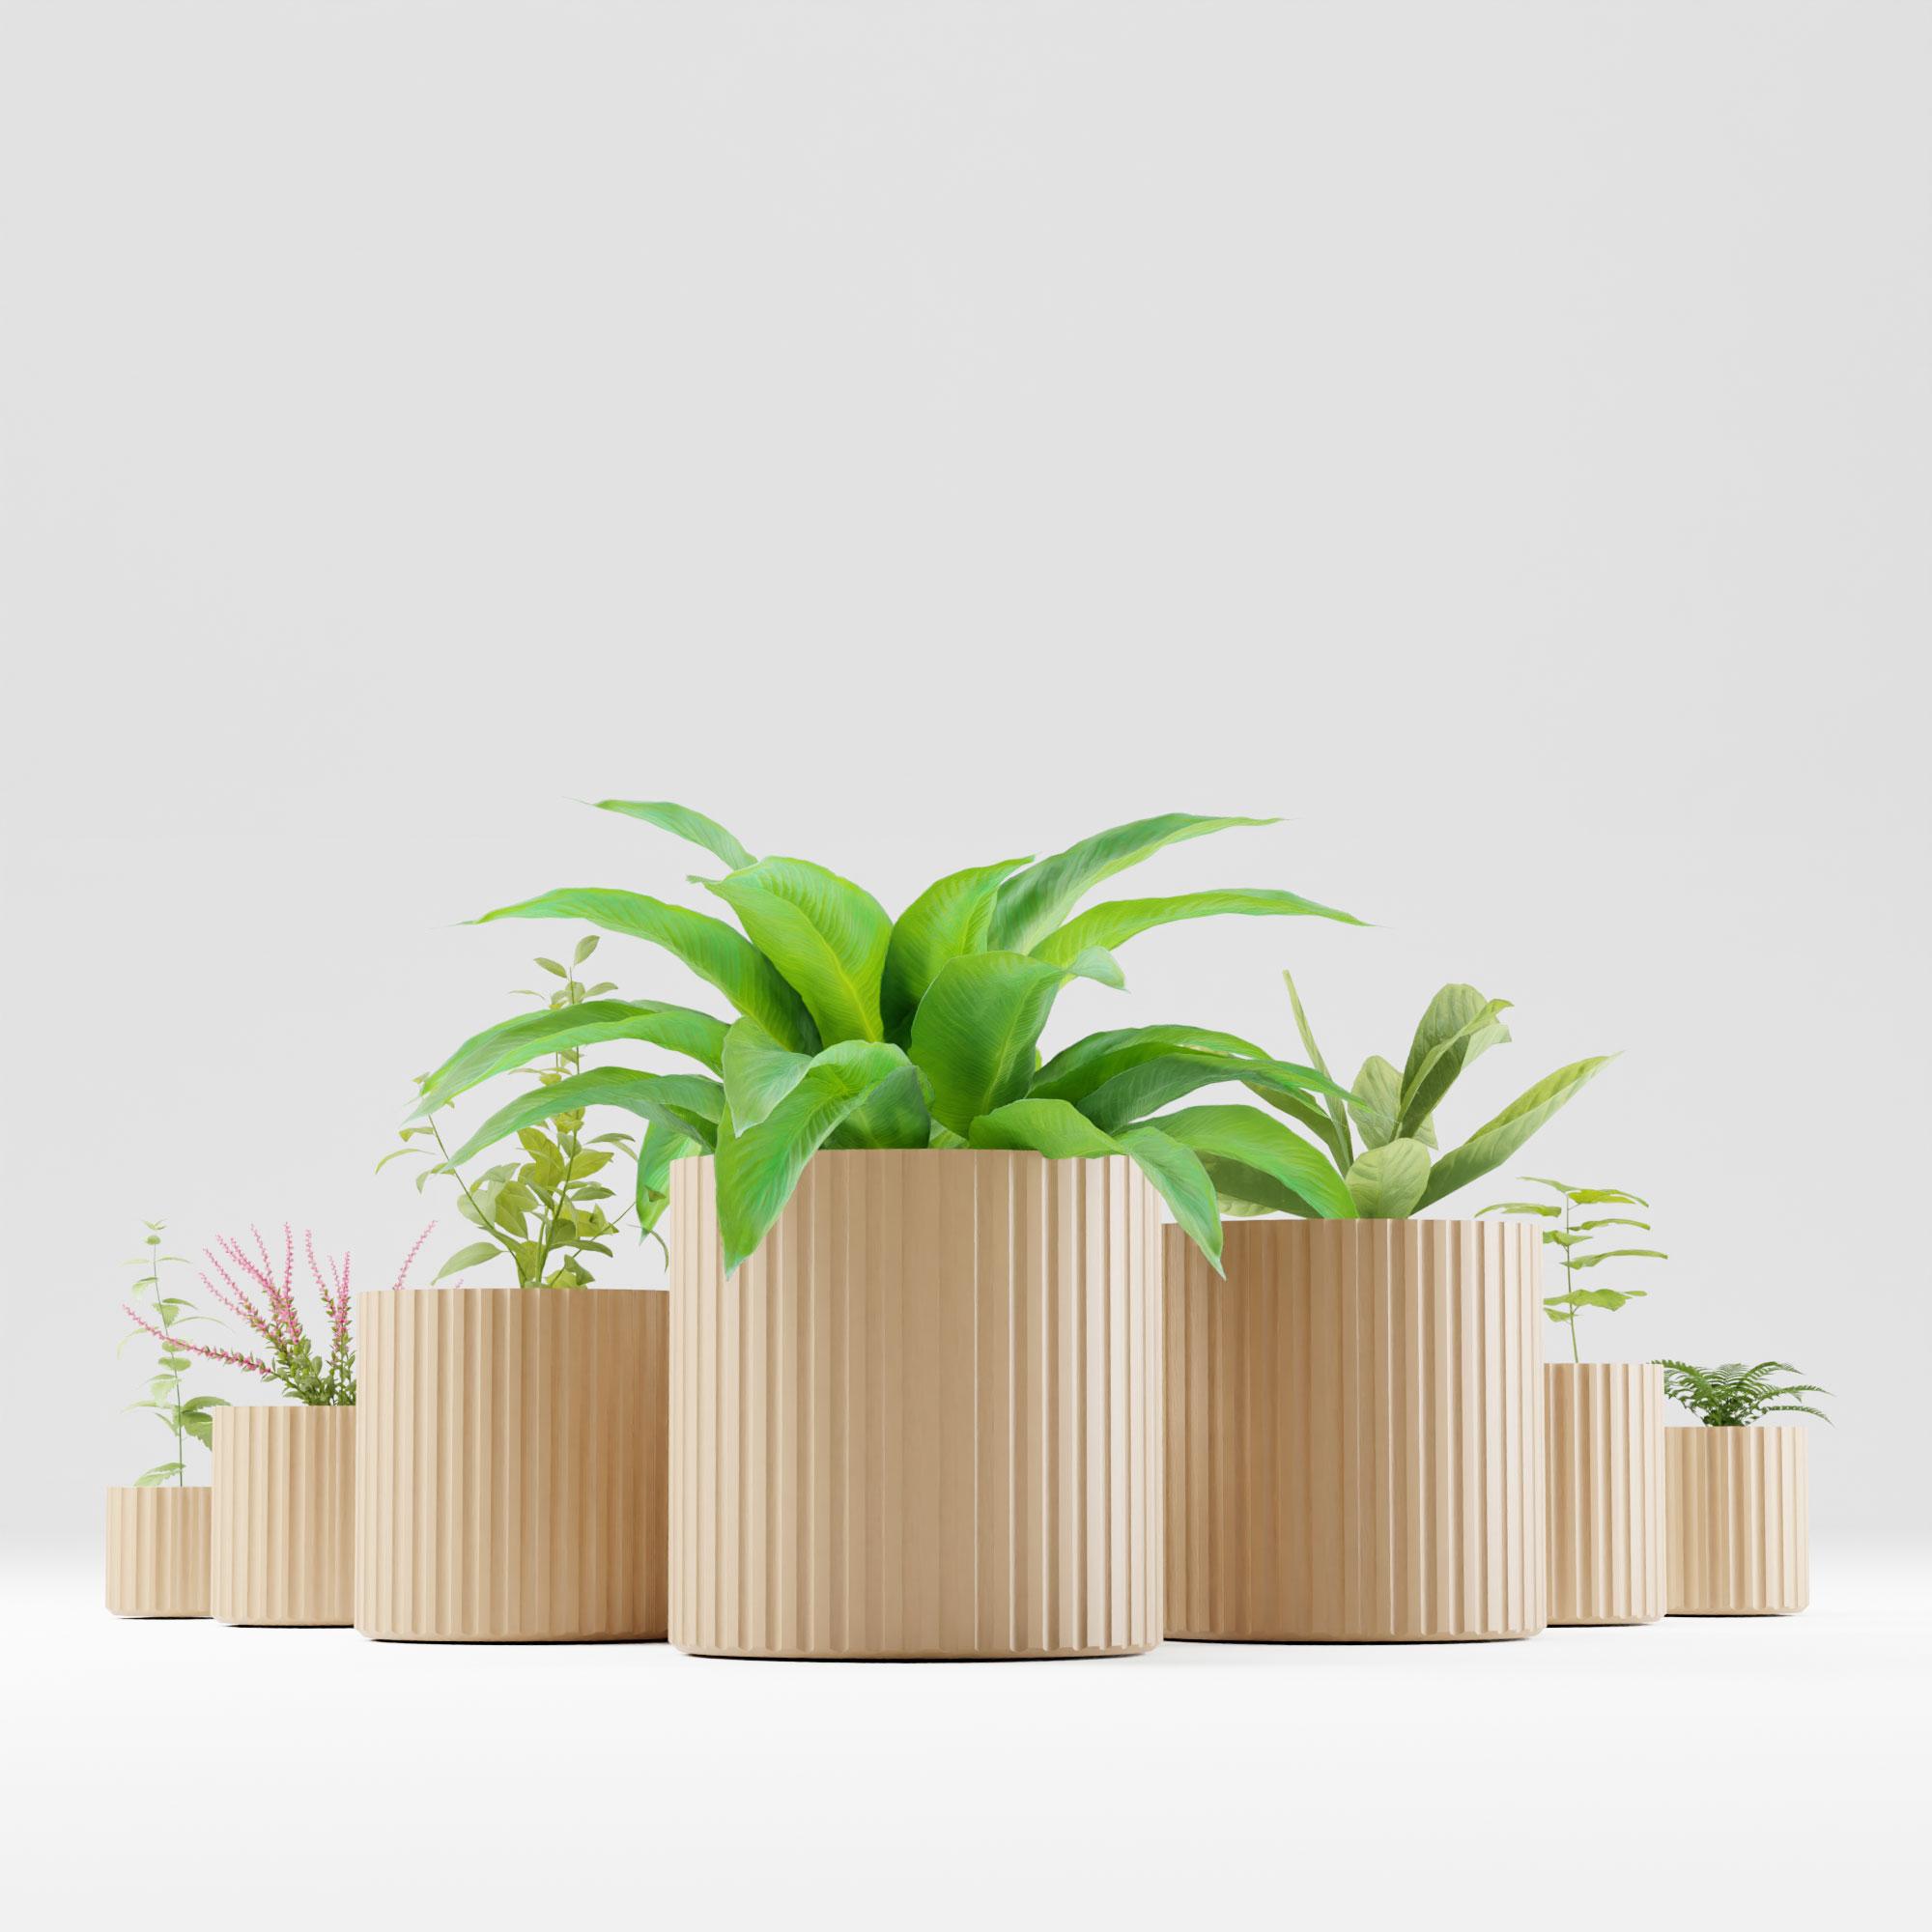 SELF WATERING PLANTER | MEGA PACK 7 SIZES | READY TO BE PRINTED IN WOOD PLA 3d model